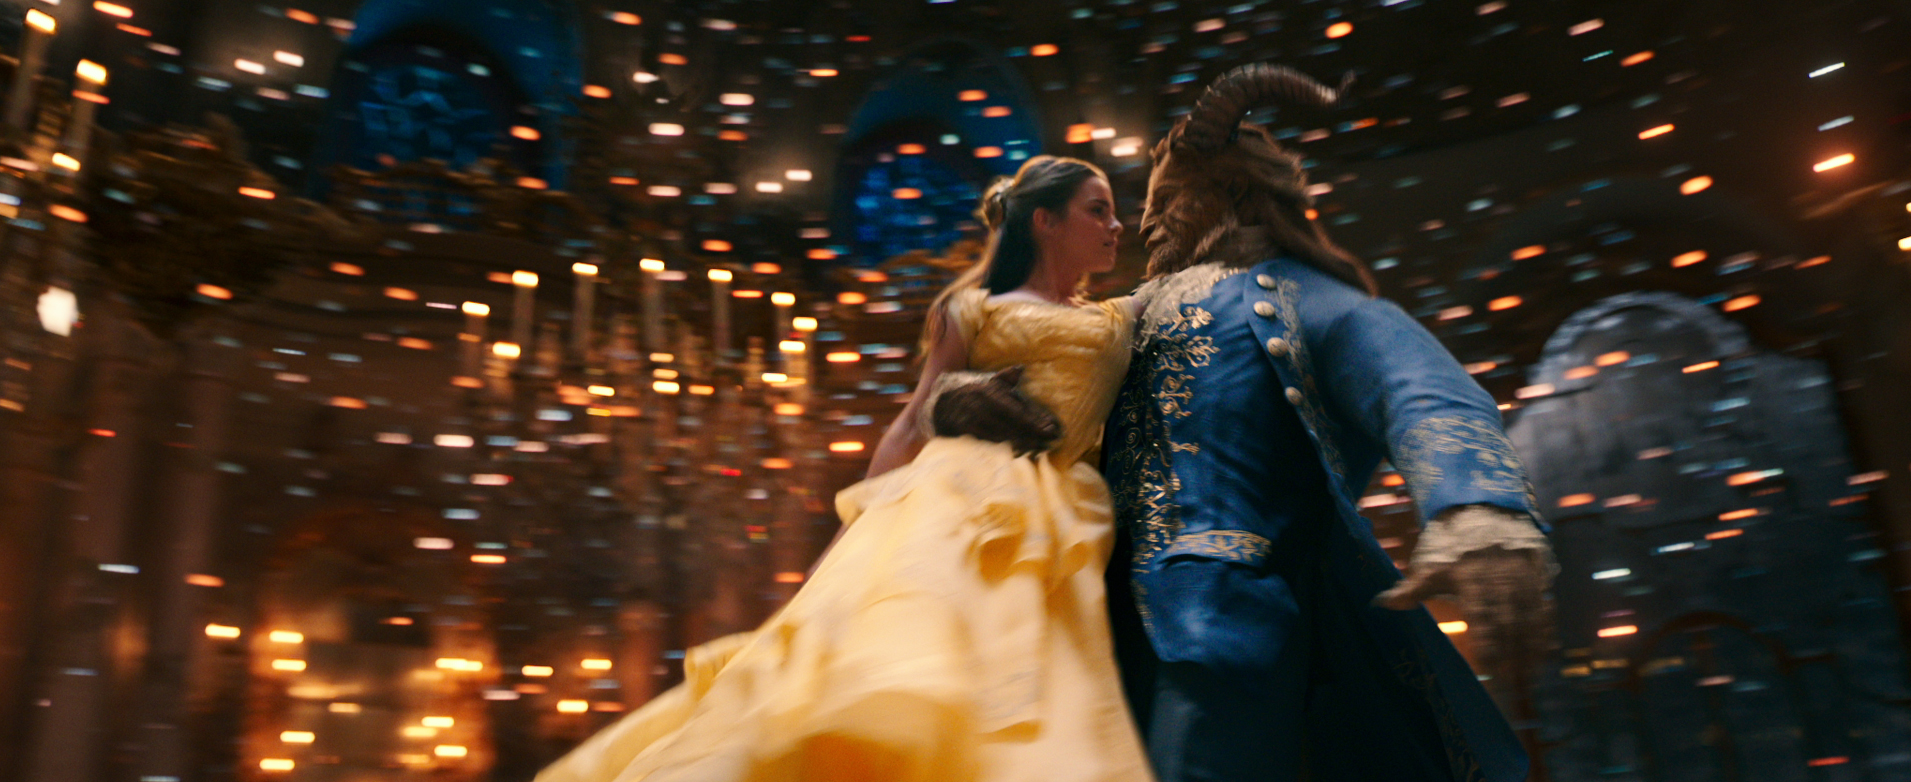 Photo of Review: Disney's Live Action 'Beauty and the Beast' is an Enchanting Reimagining of the Animated Classic